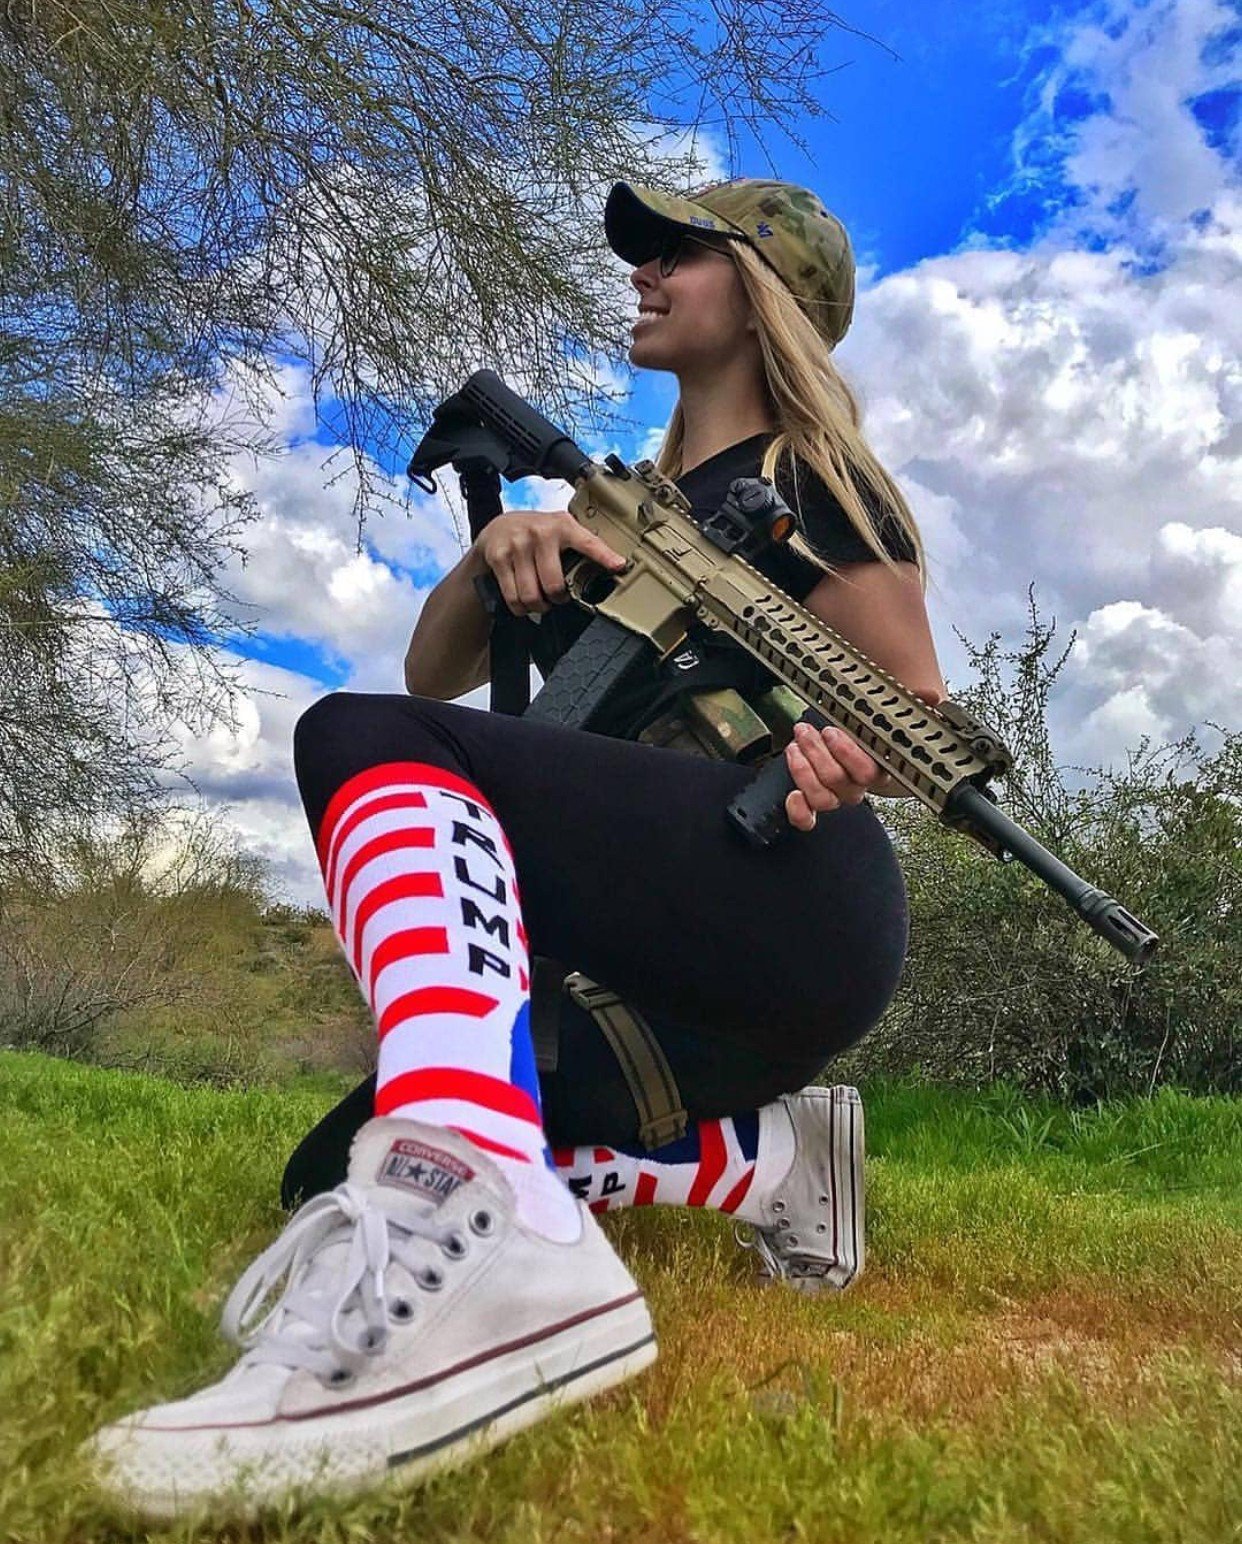 Photo by Senorpunisher with the username @Senorpunisher,  July 18, 2019 at 8:35 AM. The post is about the topic Girls with Guns